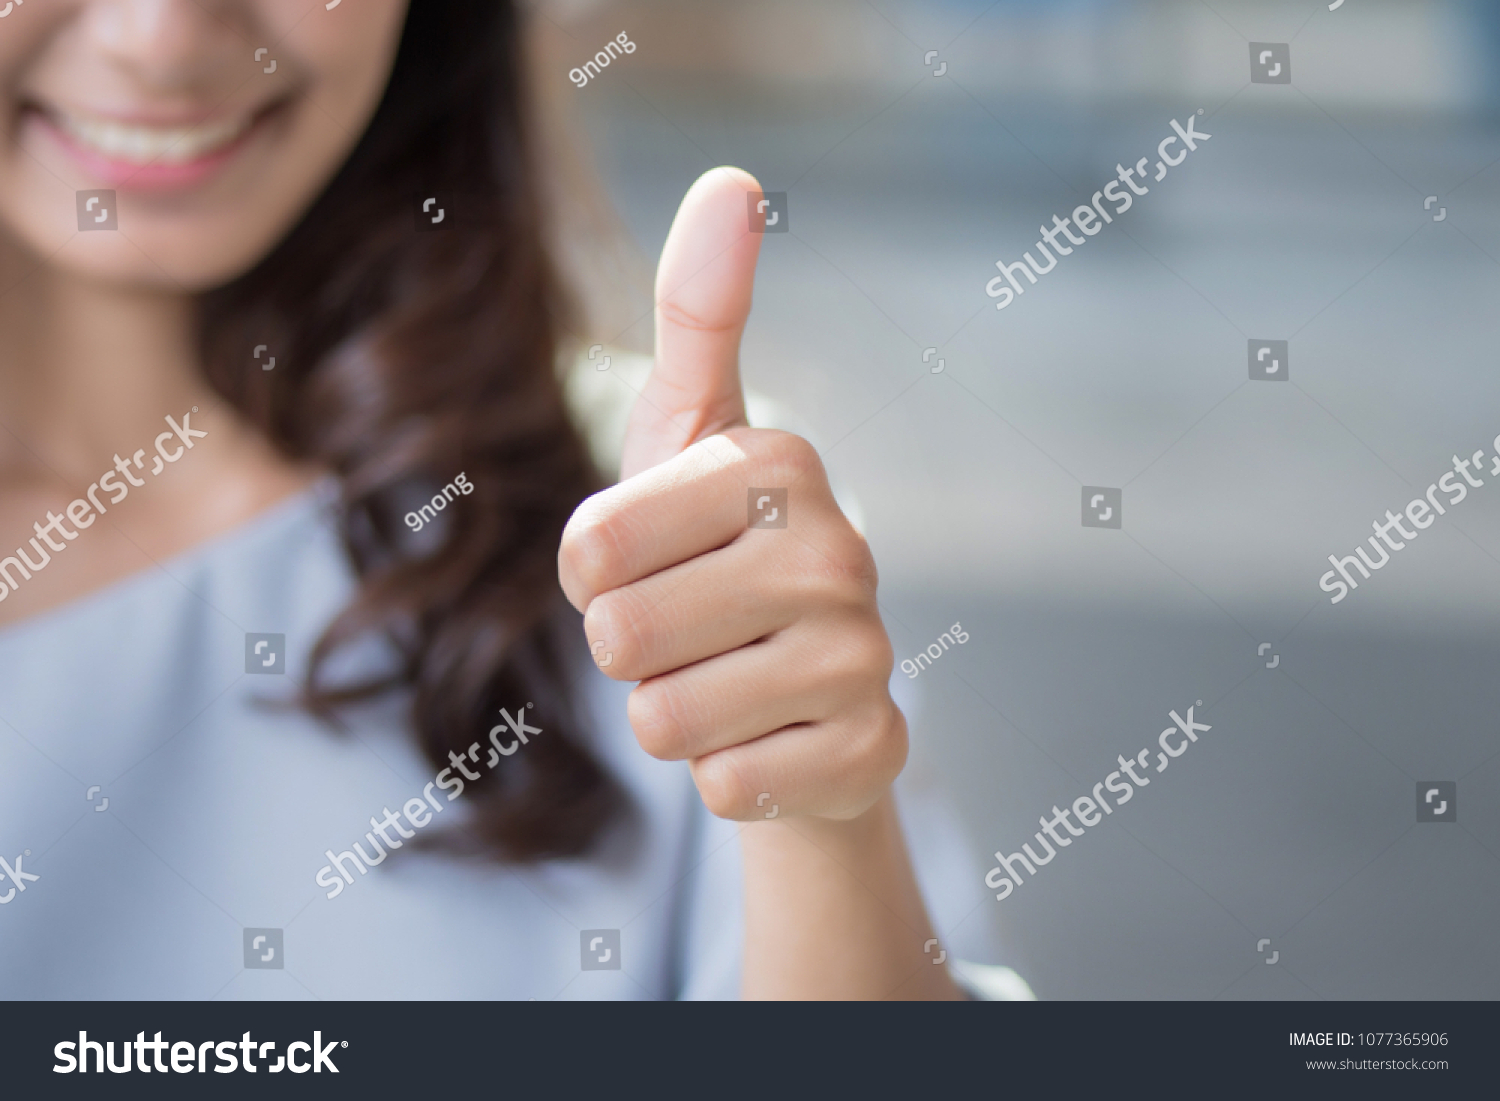 successful girl pointing thumb up sign gesture; portrait of cheerful smiling woman pointing up approving, yes, ok, good, thumb up gesture; asian woman young adult model #1077365906